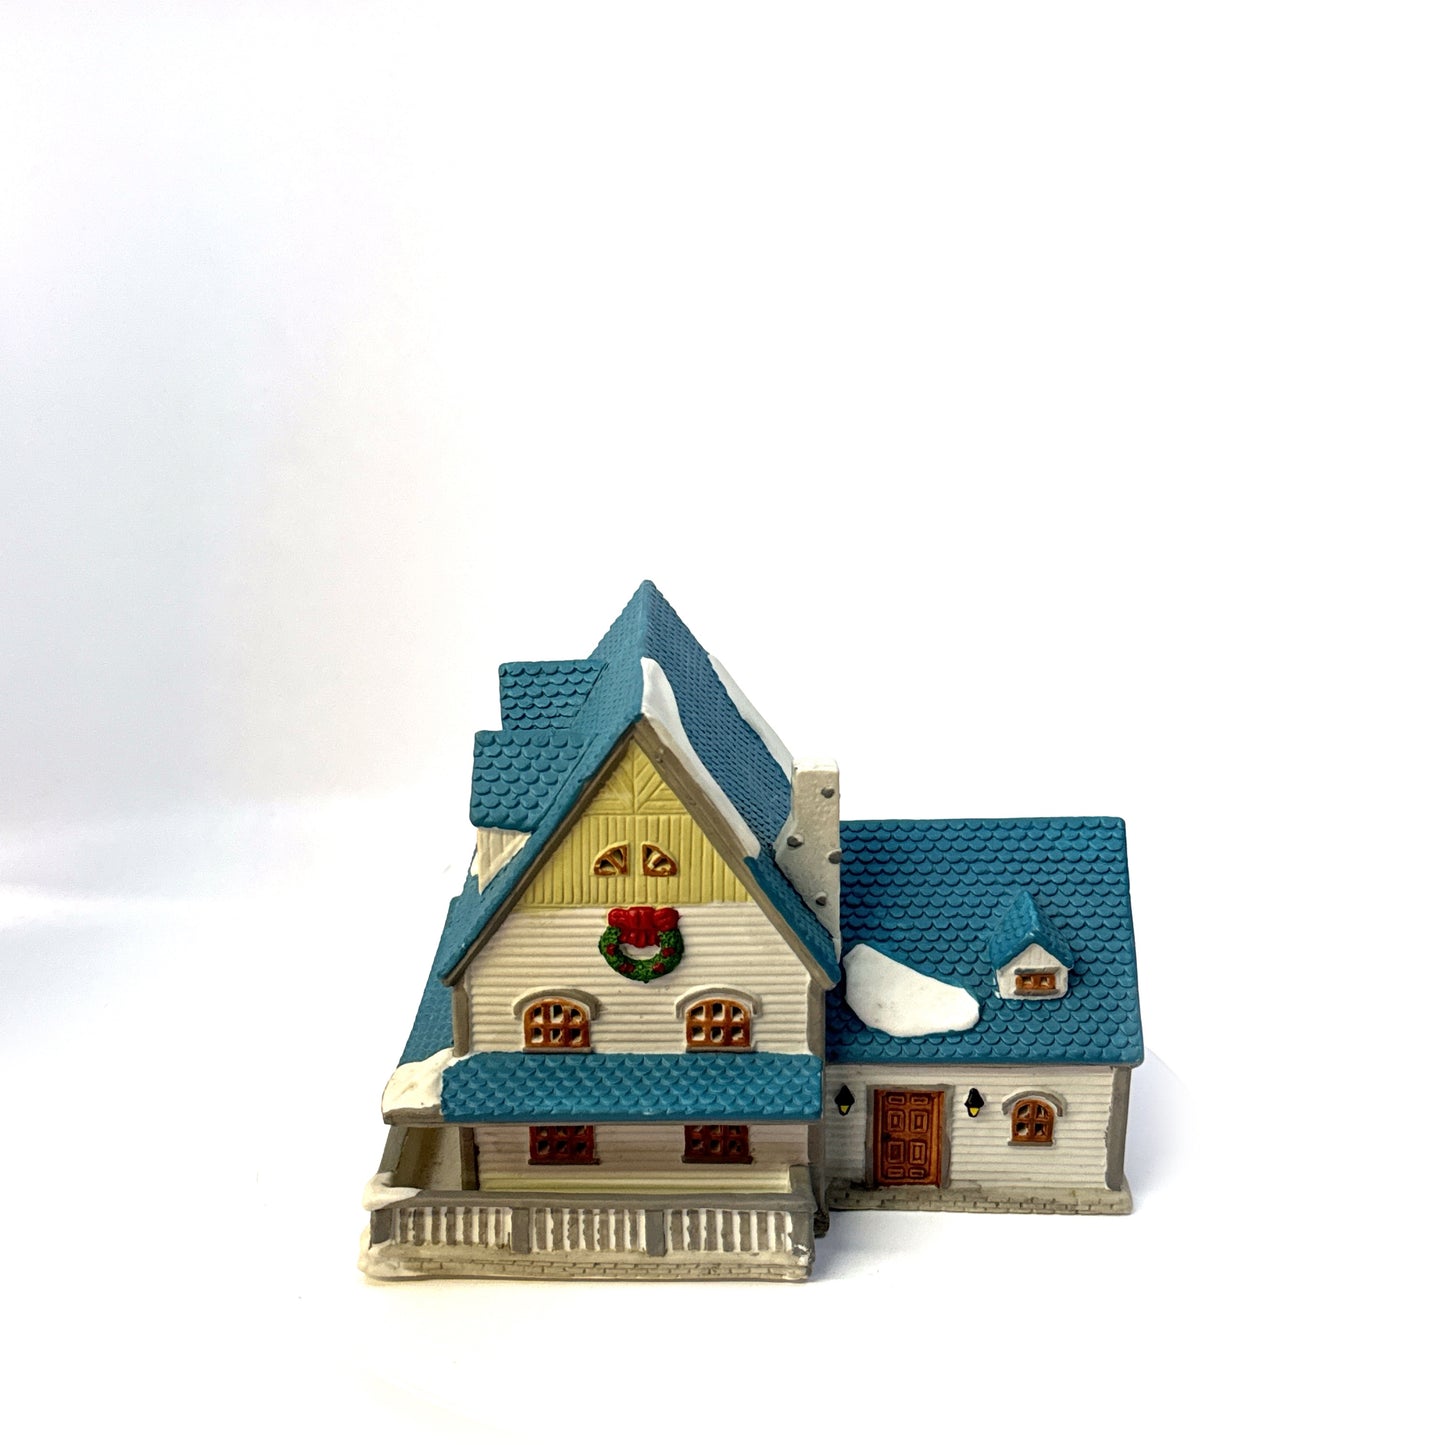 Lemax Dickensvale | Porcelain Lighted House, Blue Roof | 1995 | EUC Retired